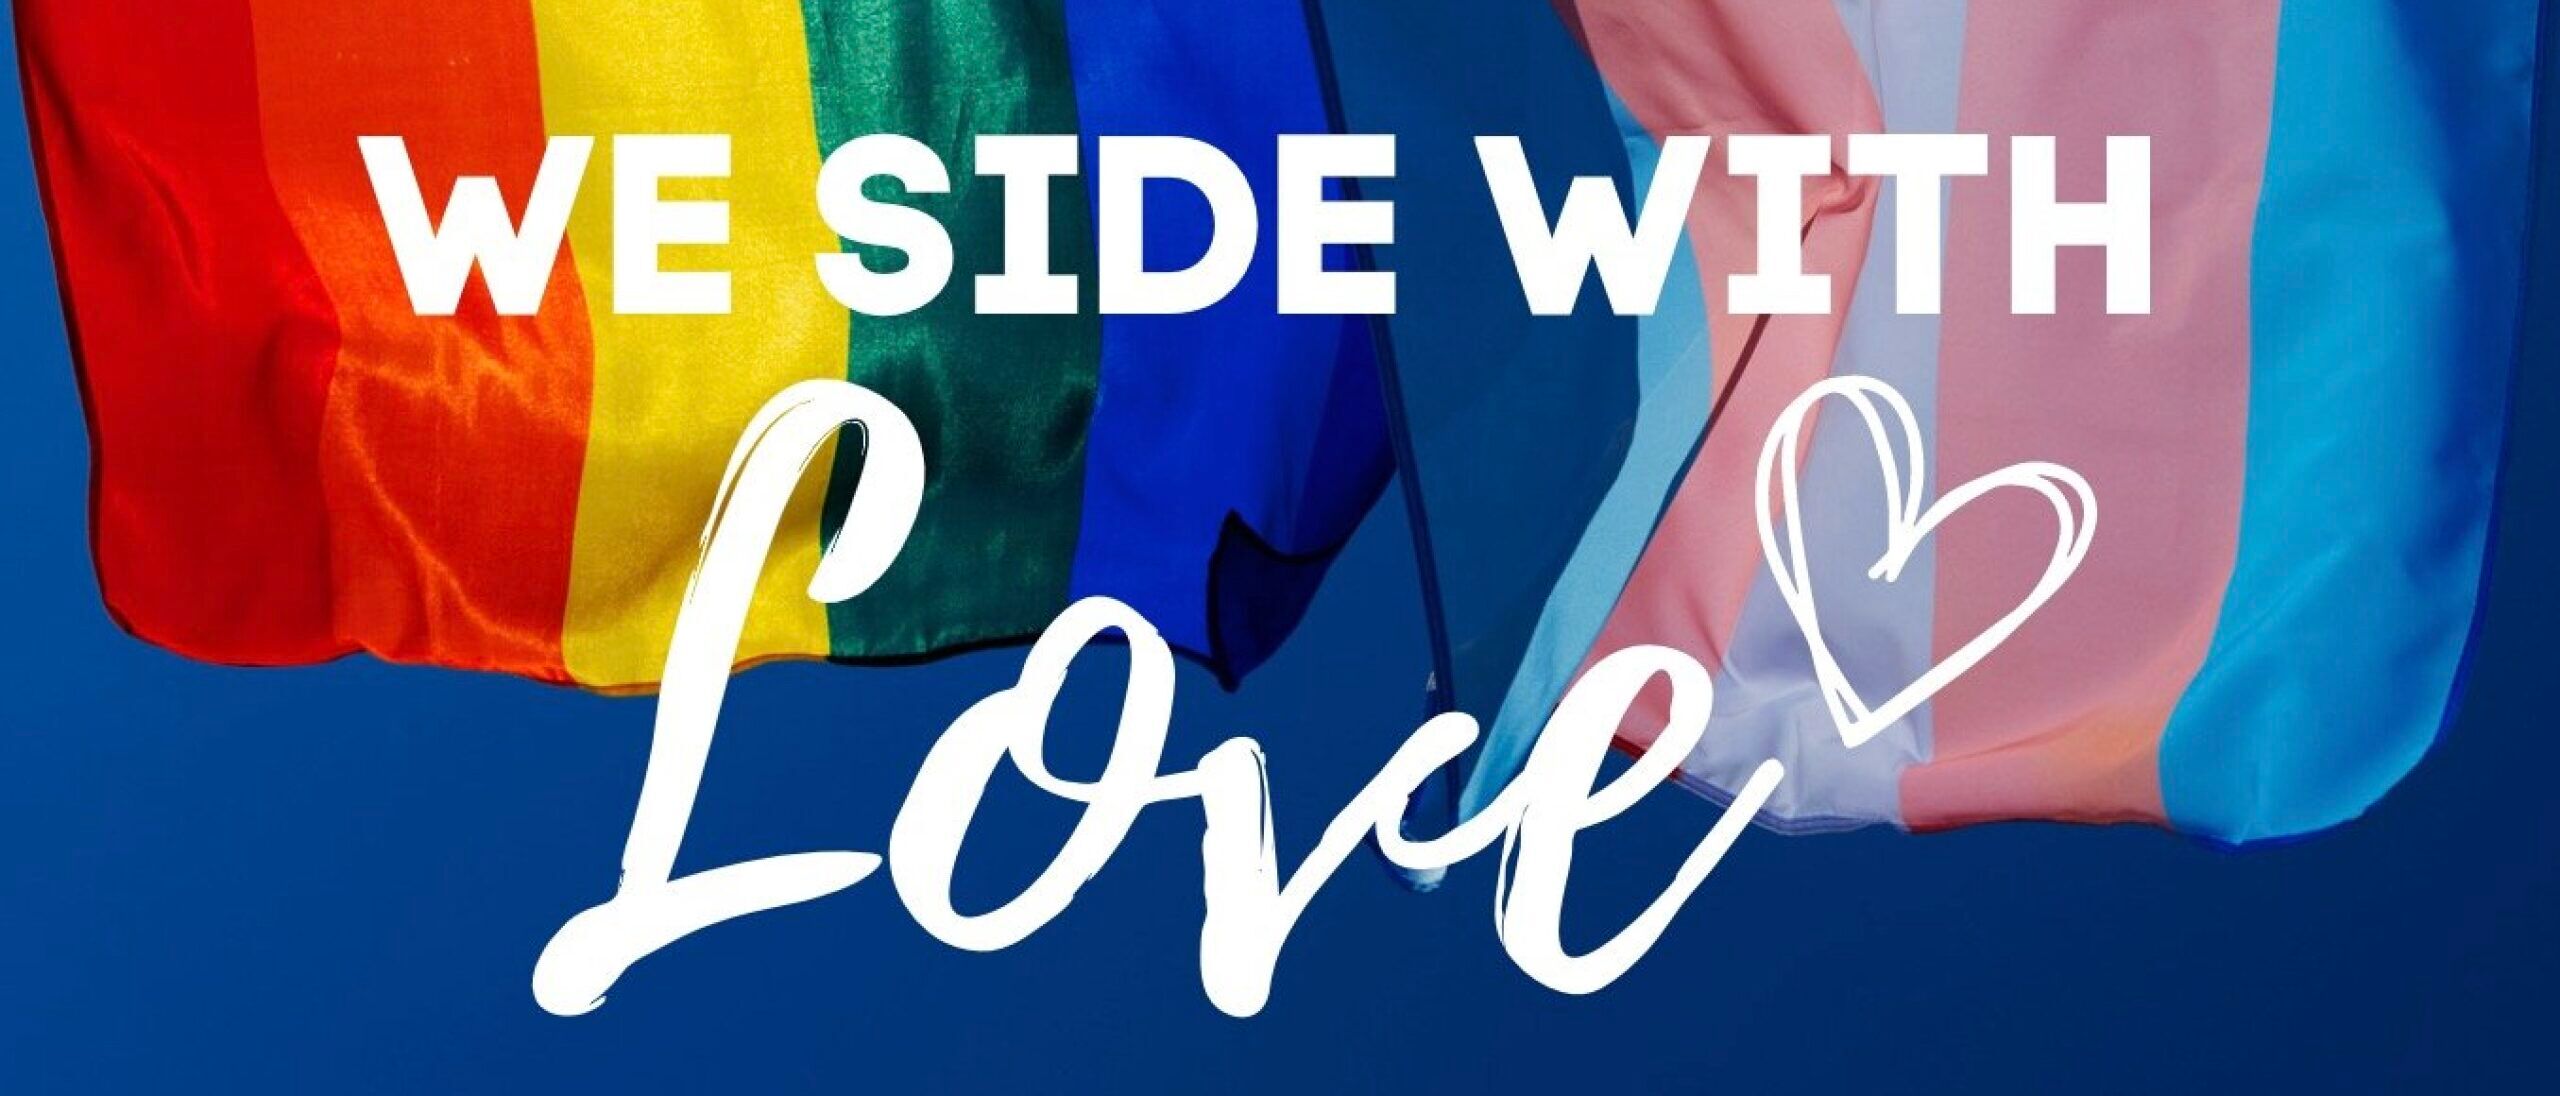 "We side with Love" flyer with LGBTQ+ and trans pride flags